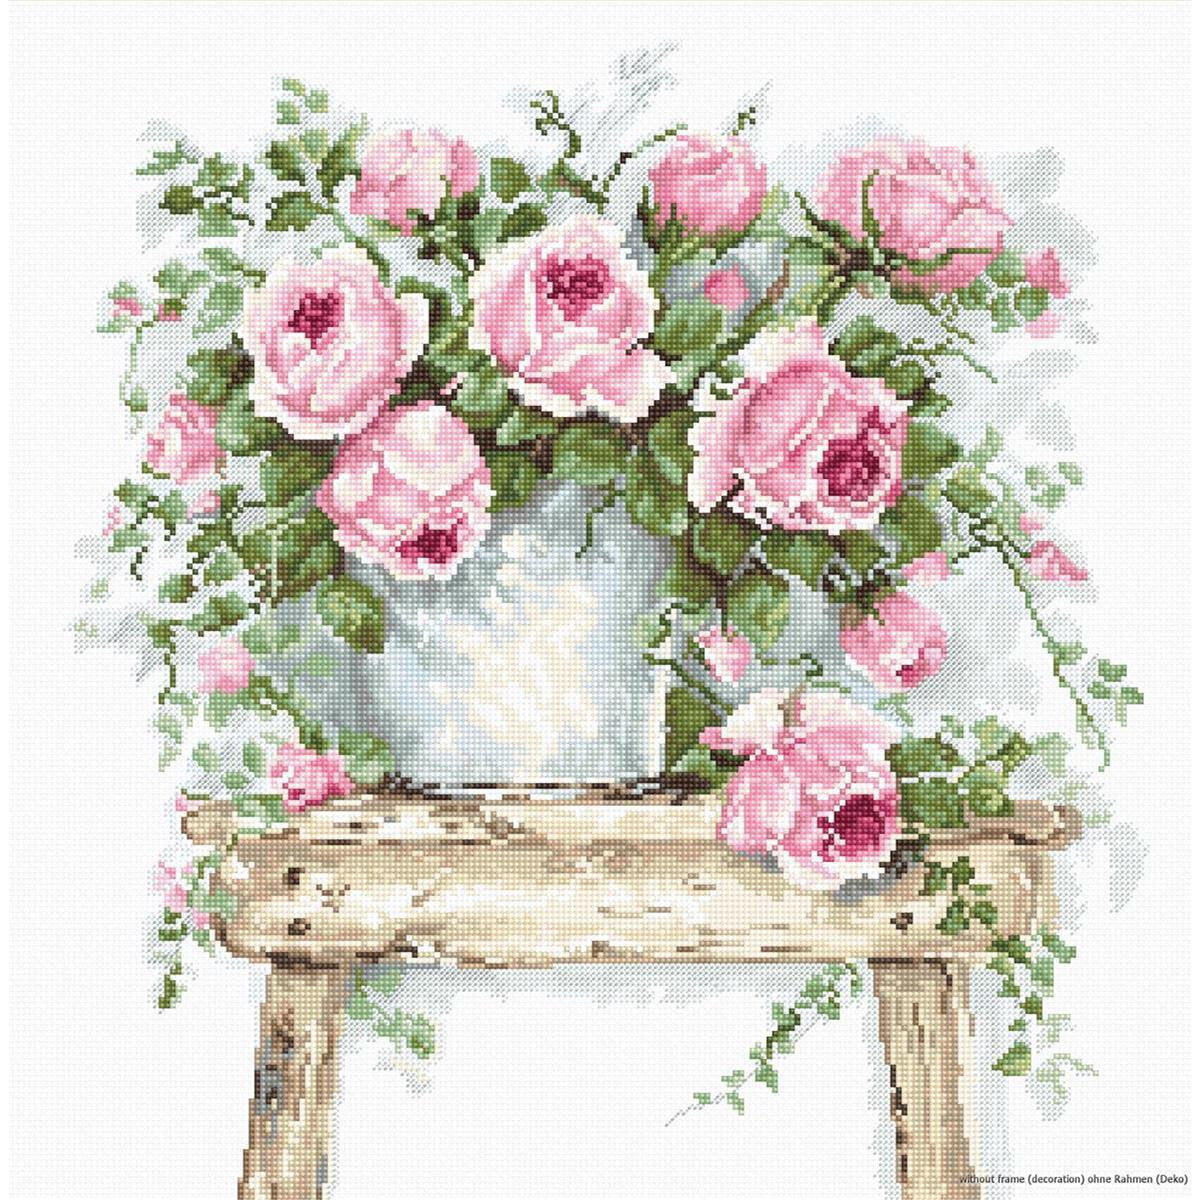 Luca-S counted Cross Stitch kit "Flowers on a Stool...